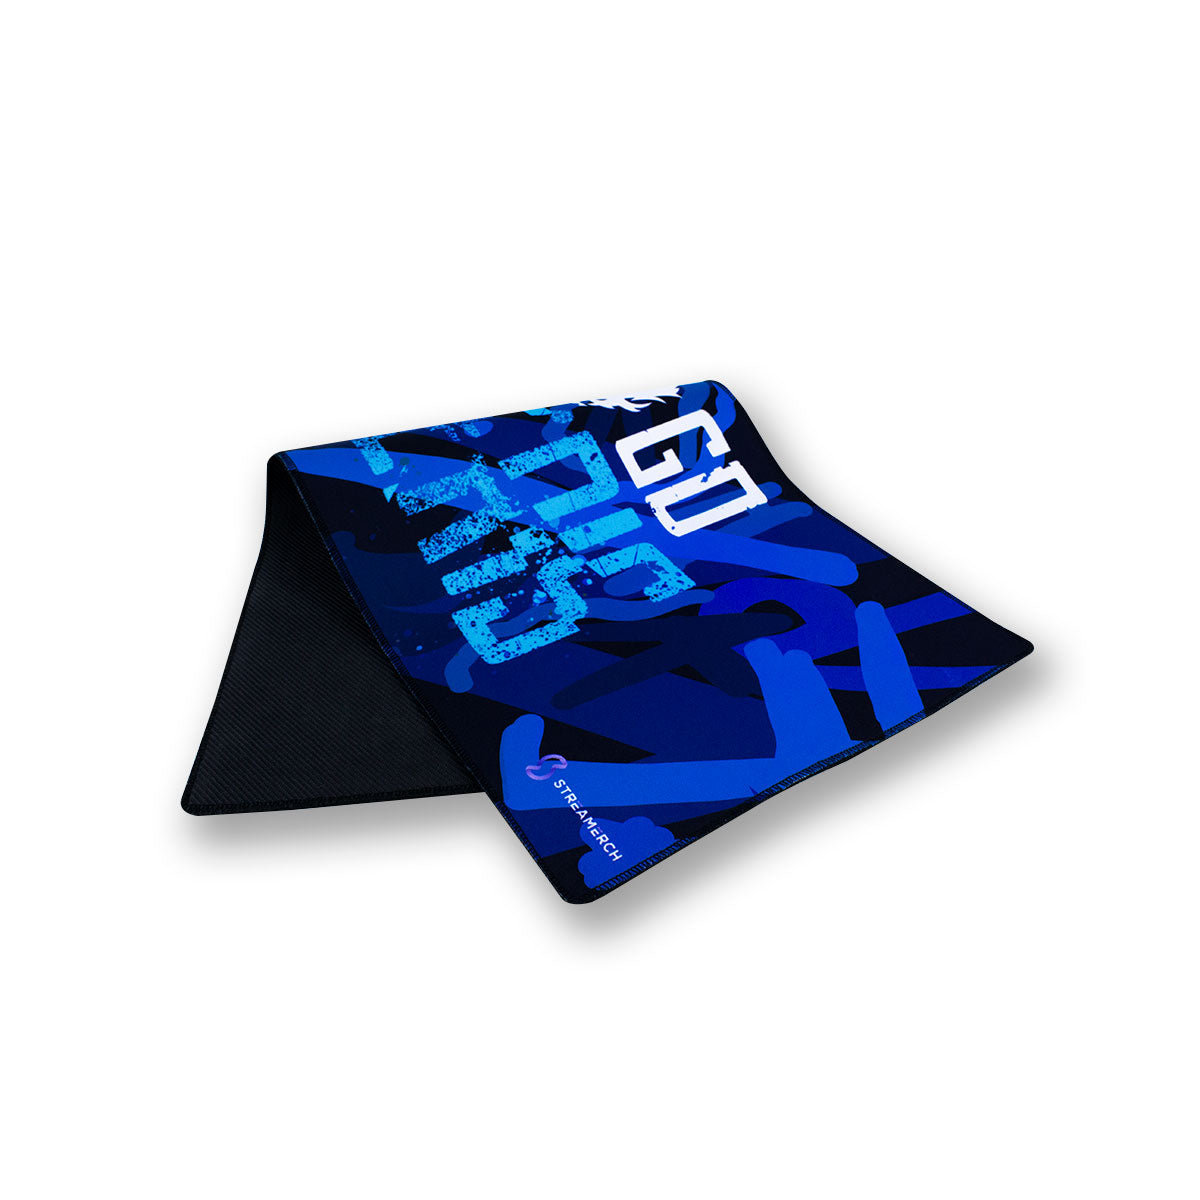 Mousepad Gamer Atheris 70 by 30 cm